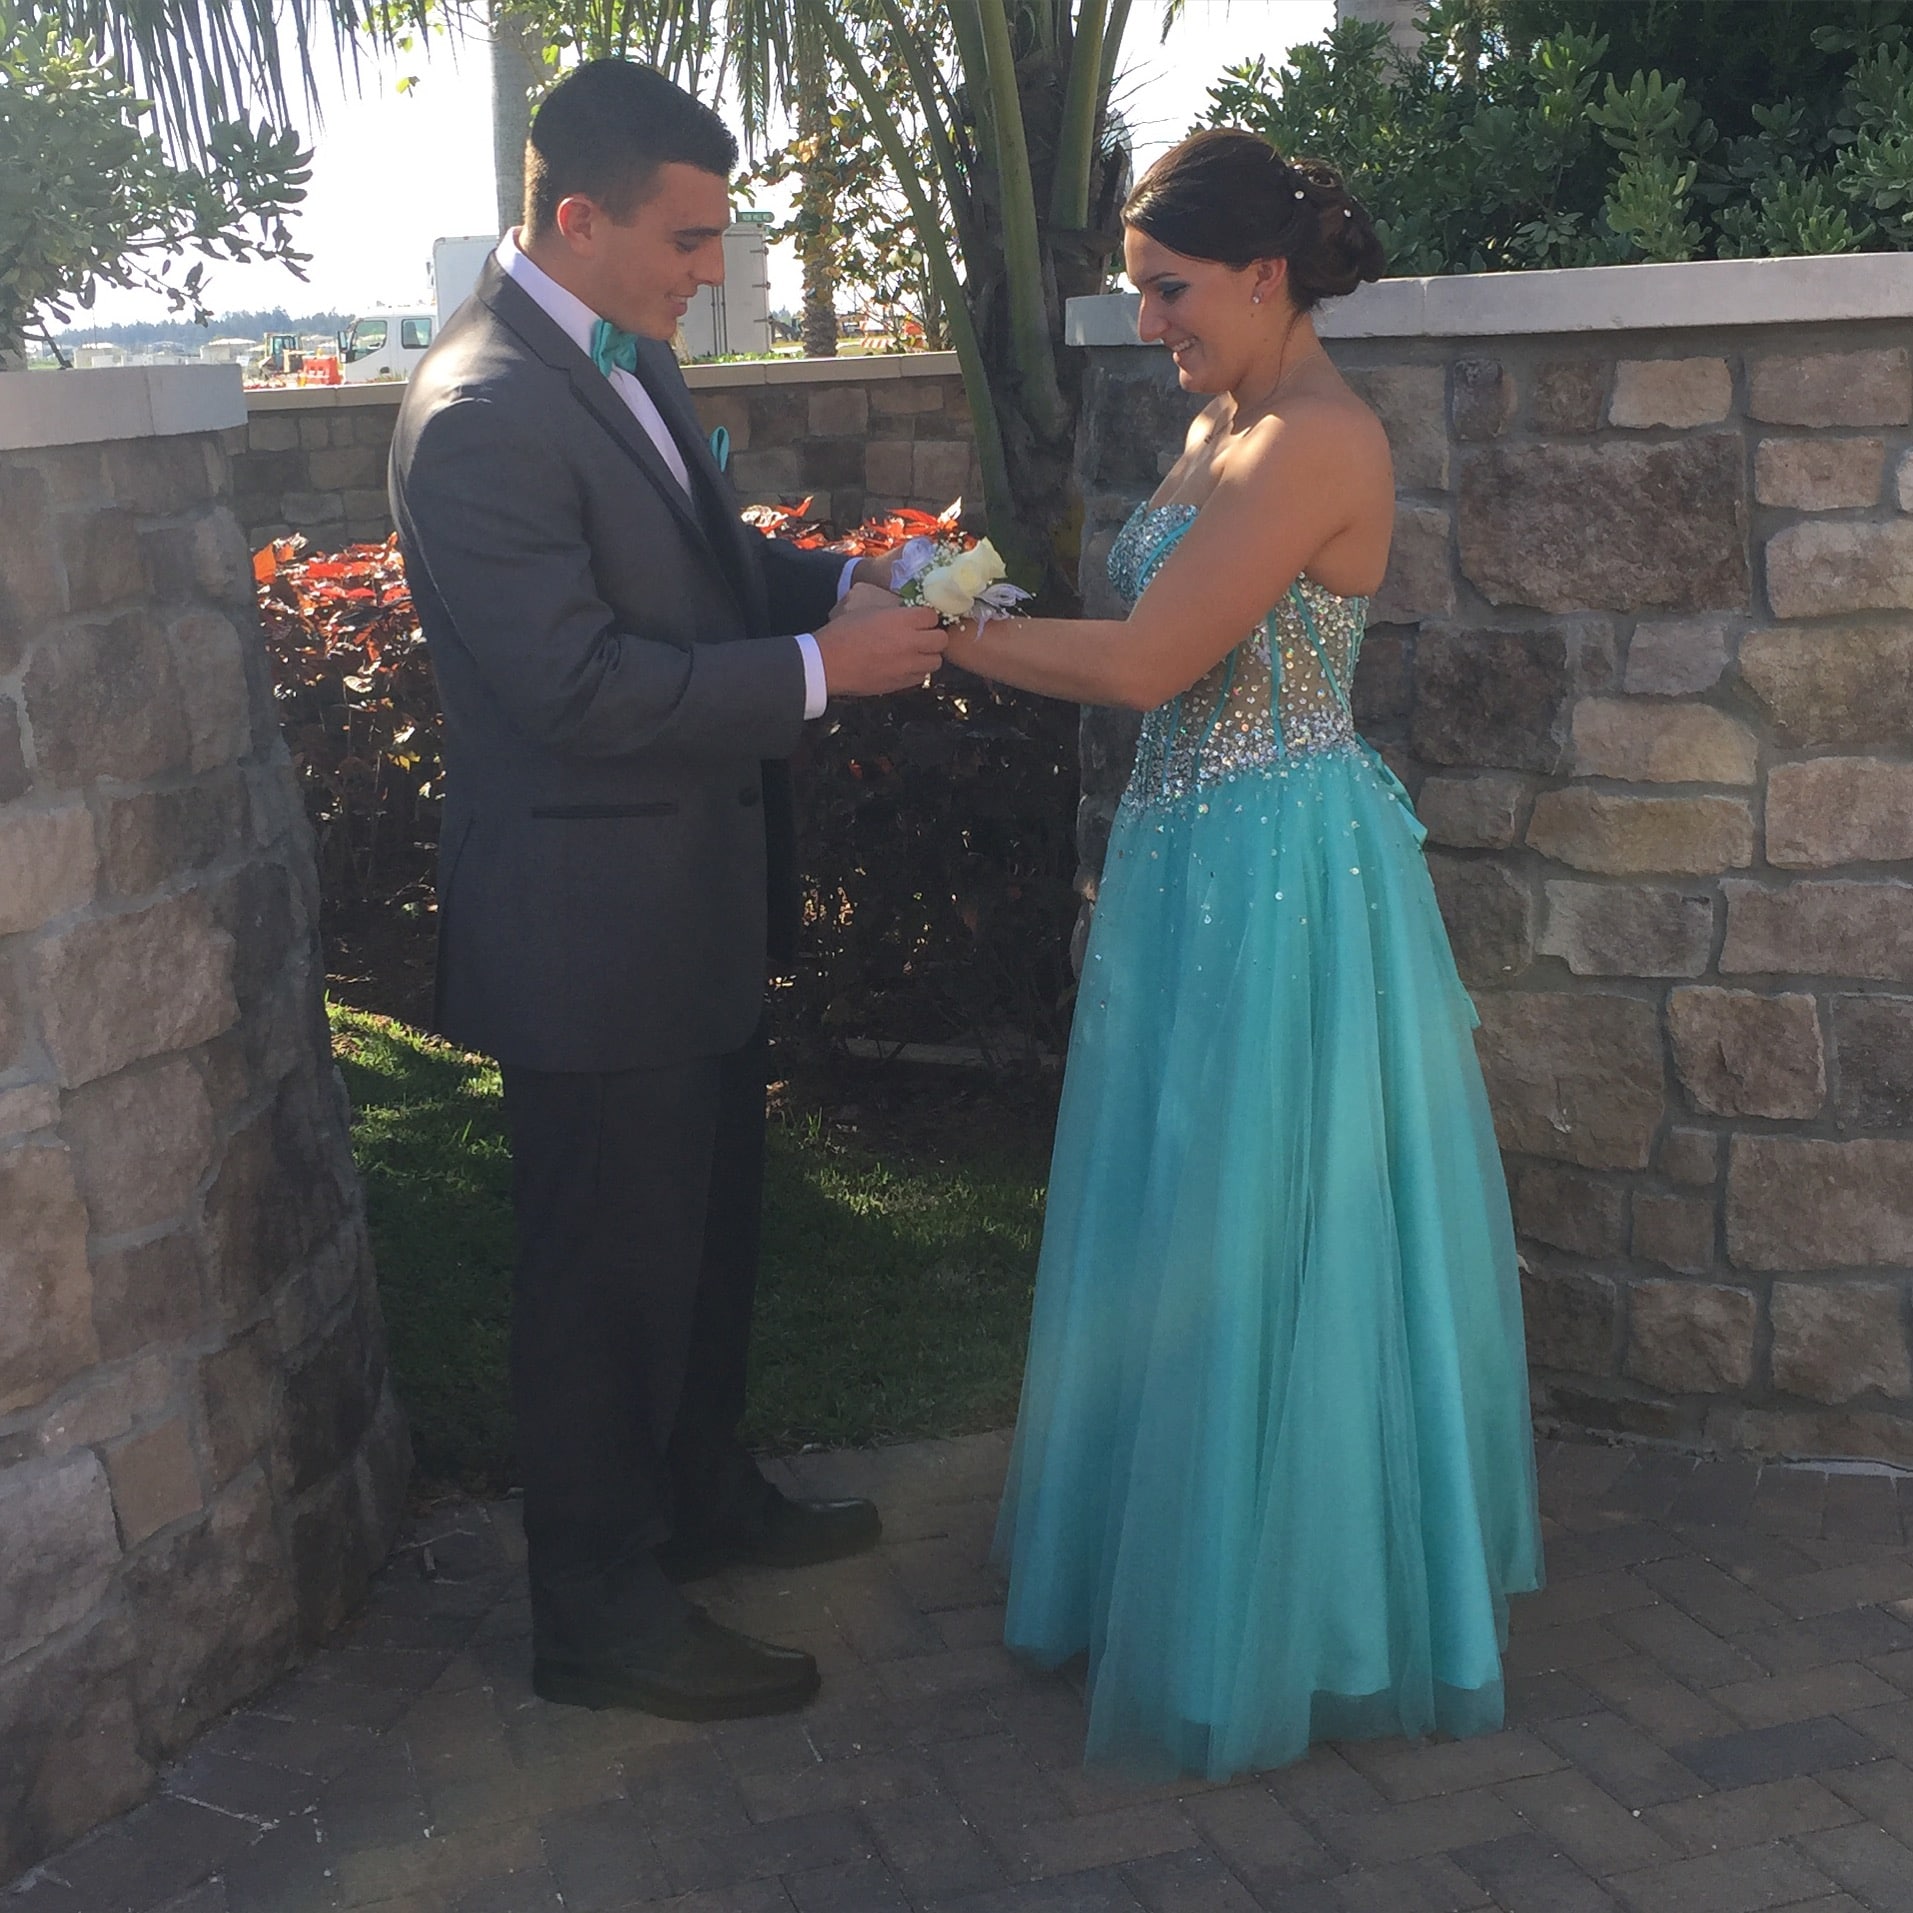 high school couple getting corsage with girl in turquoise dress